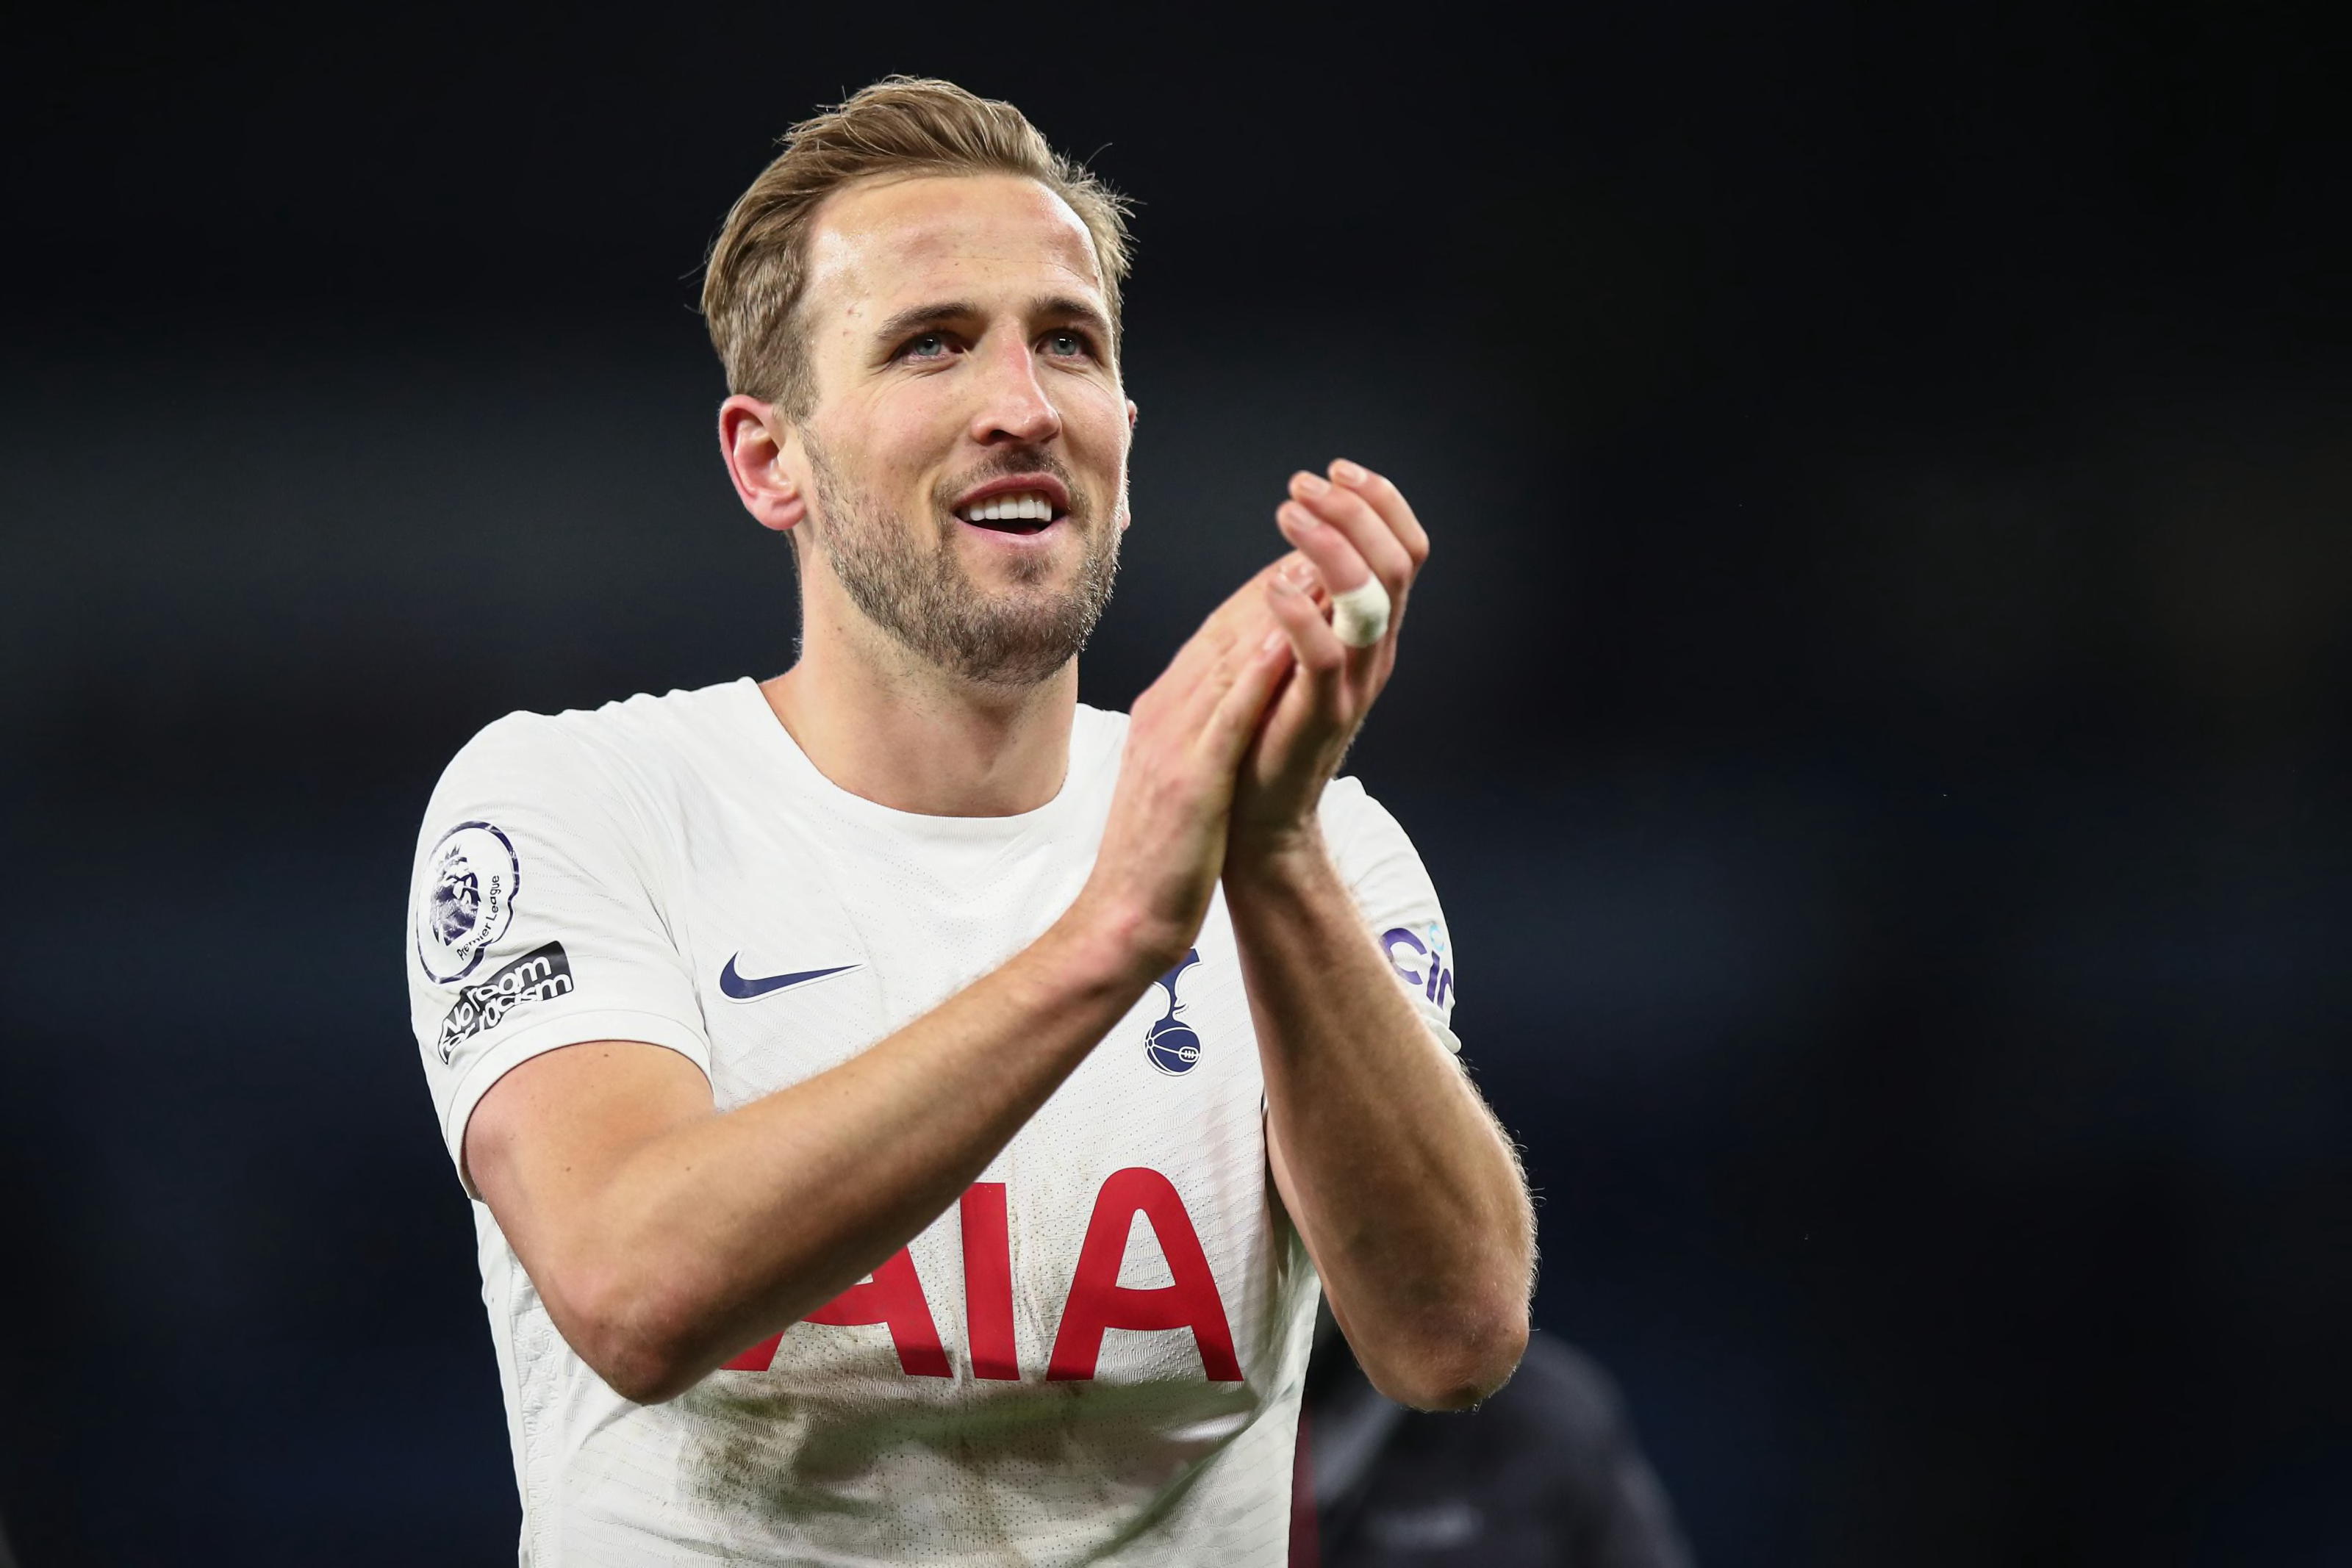 MANCHESTER, ENGLAND - FEBRUARY 19: Harry Kane of Tottenham Hotspur applauds at full time during the Premier League match between Manchester City and Tottenham Hotspur at Etihad Stadium on February 19, 2022 in Manchester, United Kingdom. (Photo by Robbie Jay Barratt - AMA/Getty Images)